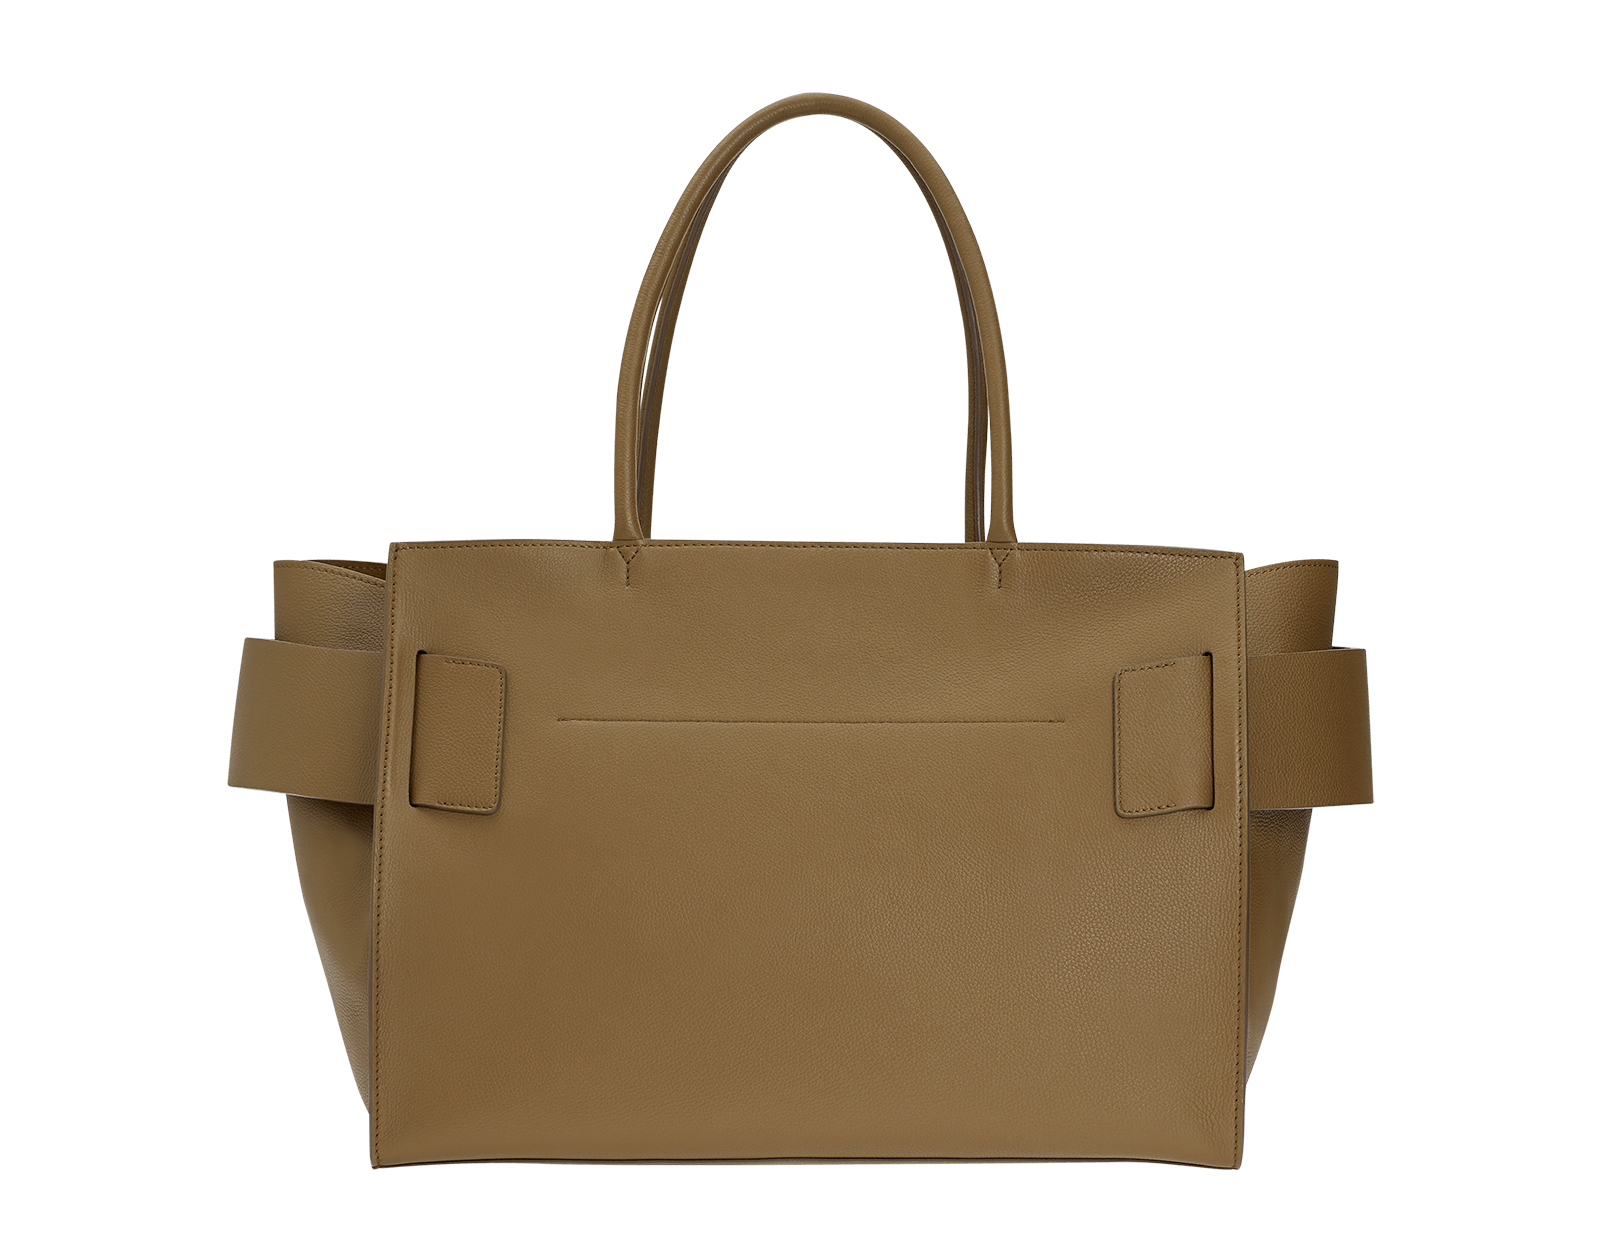 Large, brown, soft leather bag made with natural grain calfskin. Features an unfastened, oversized buckle and twin handles.